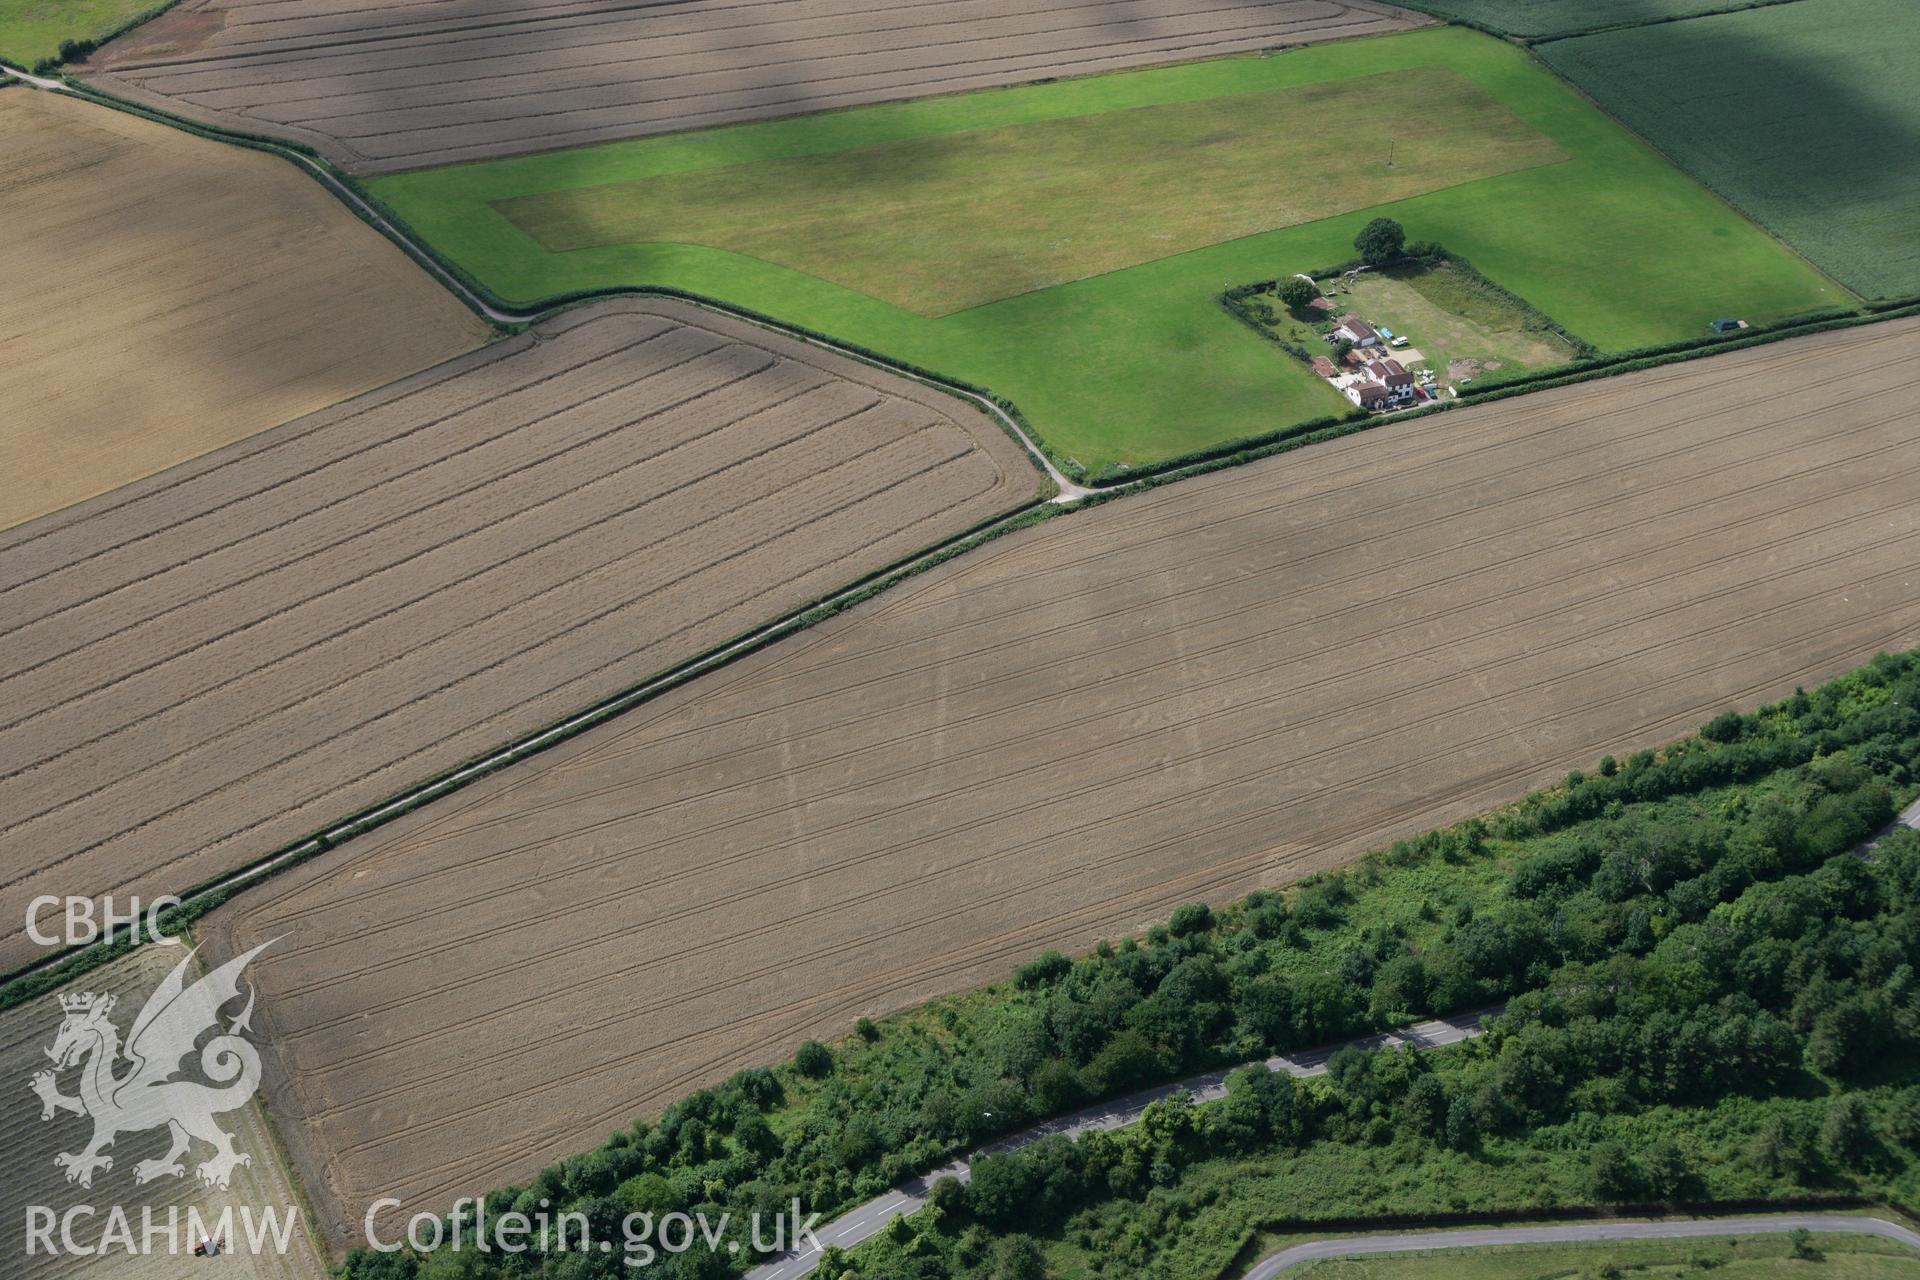 RCAHMW colour oblique photograph of Trewern Enclosure Complex, Ancient Field System. Taken by Toby Driver on 29/07/2010.